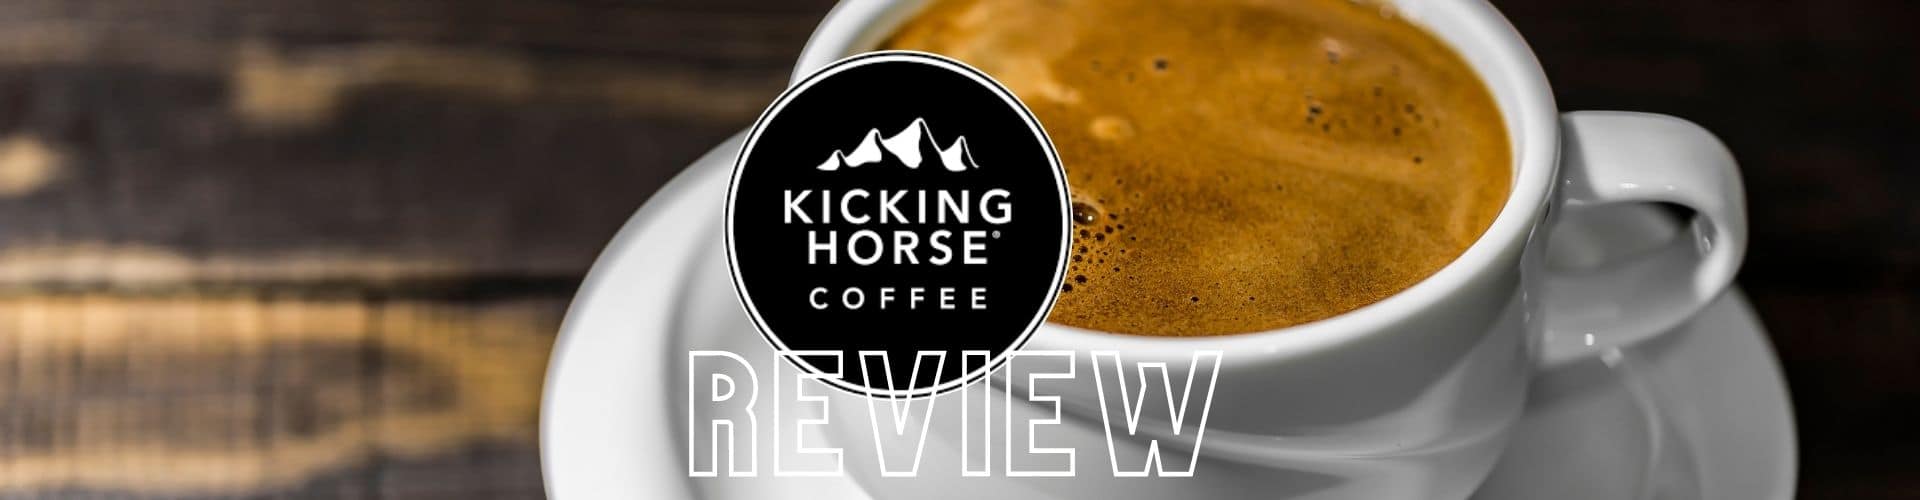 Kicking Horse Coffee Review: Grocery-Store Brand or Artisanal?